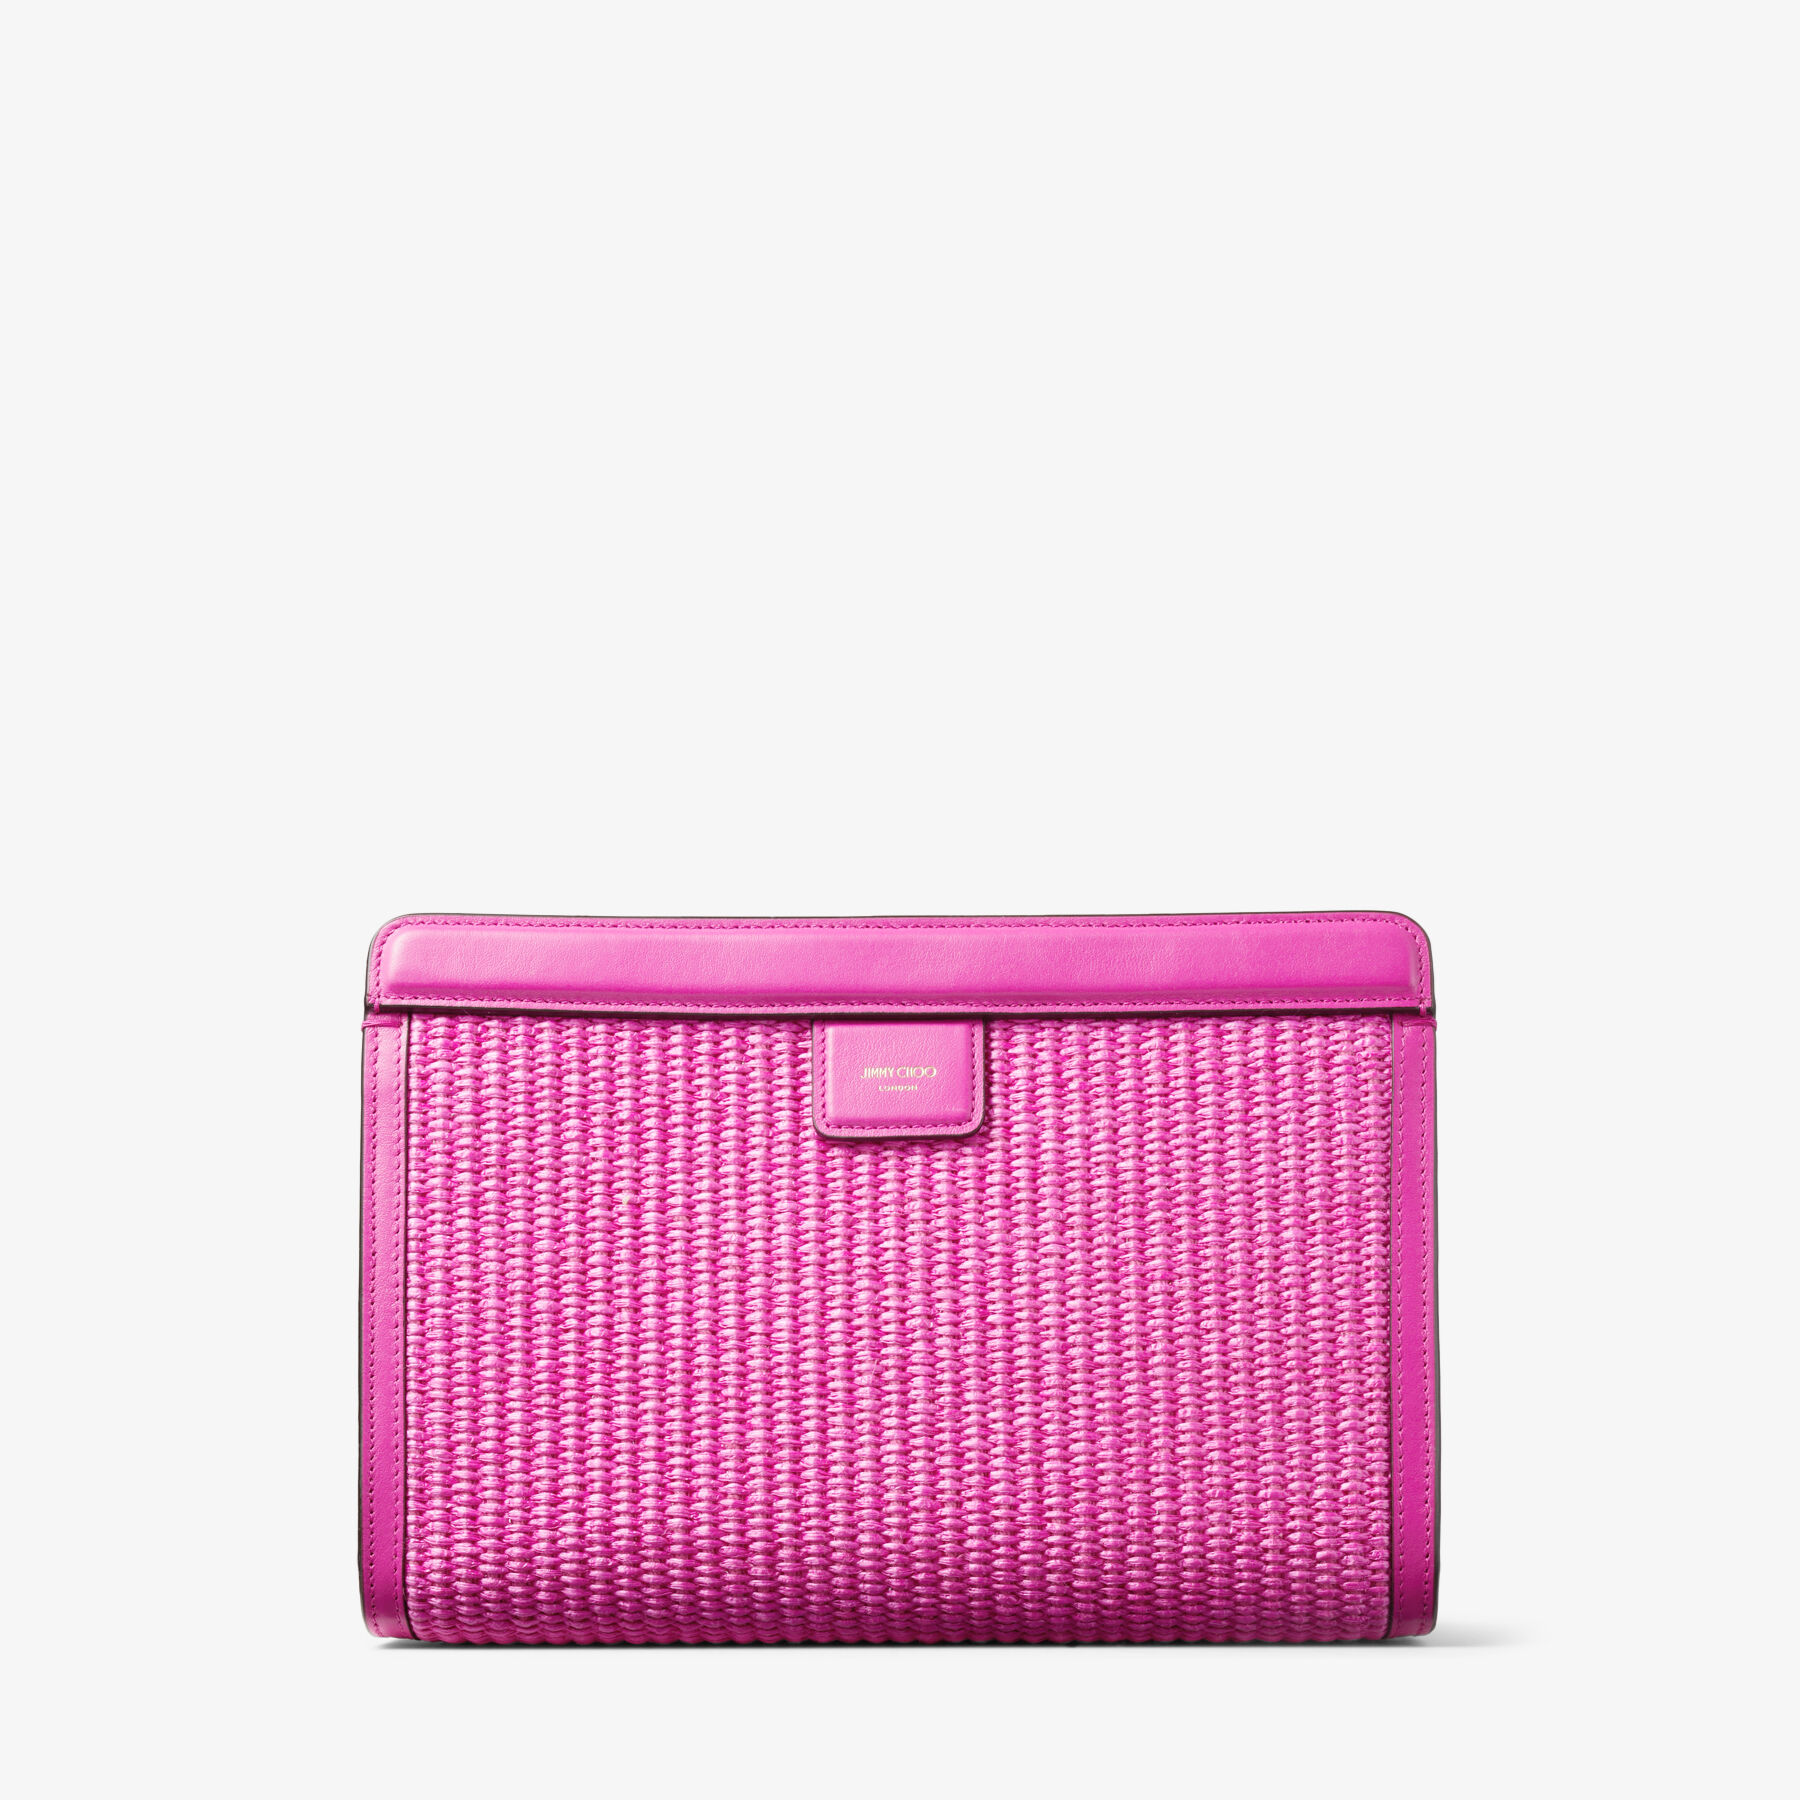 Fuchsia Raffia and Smooth Leather Pouch with Jimmy Choo Embroidery ...